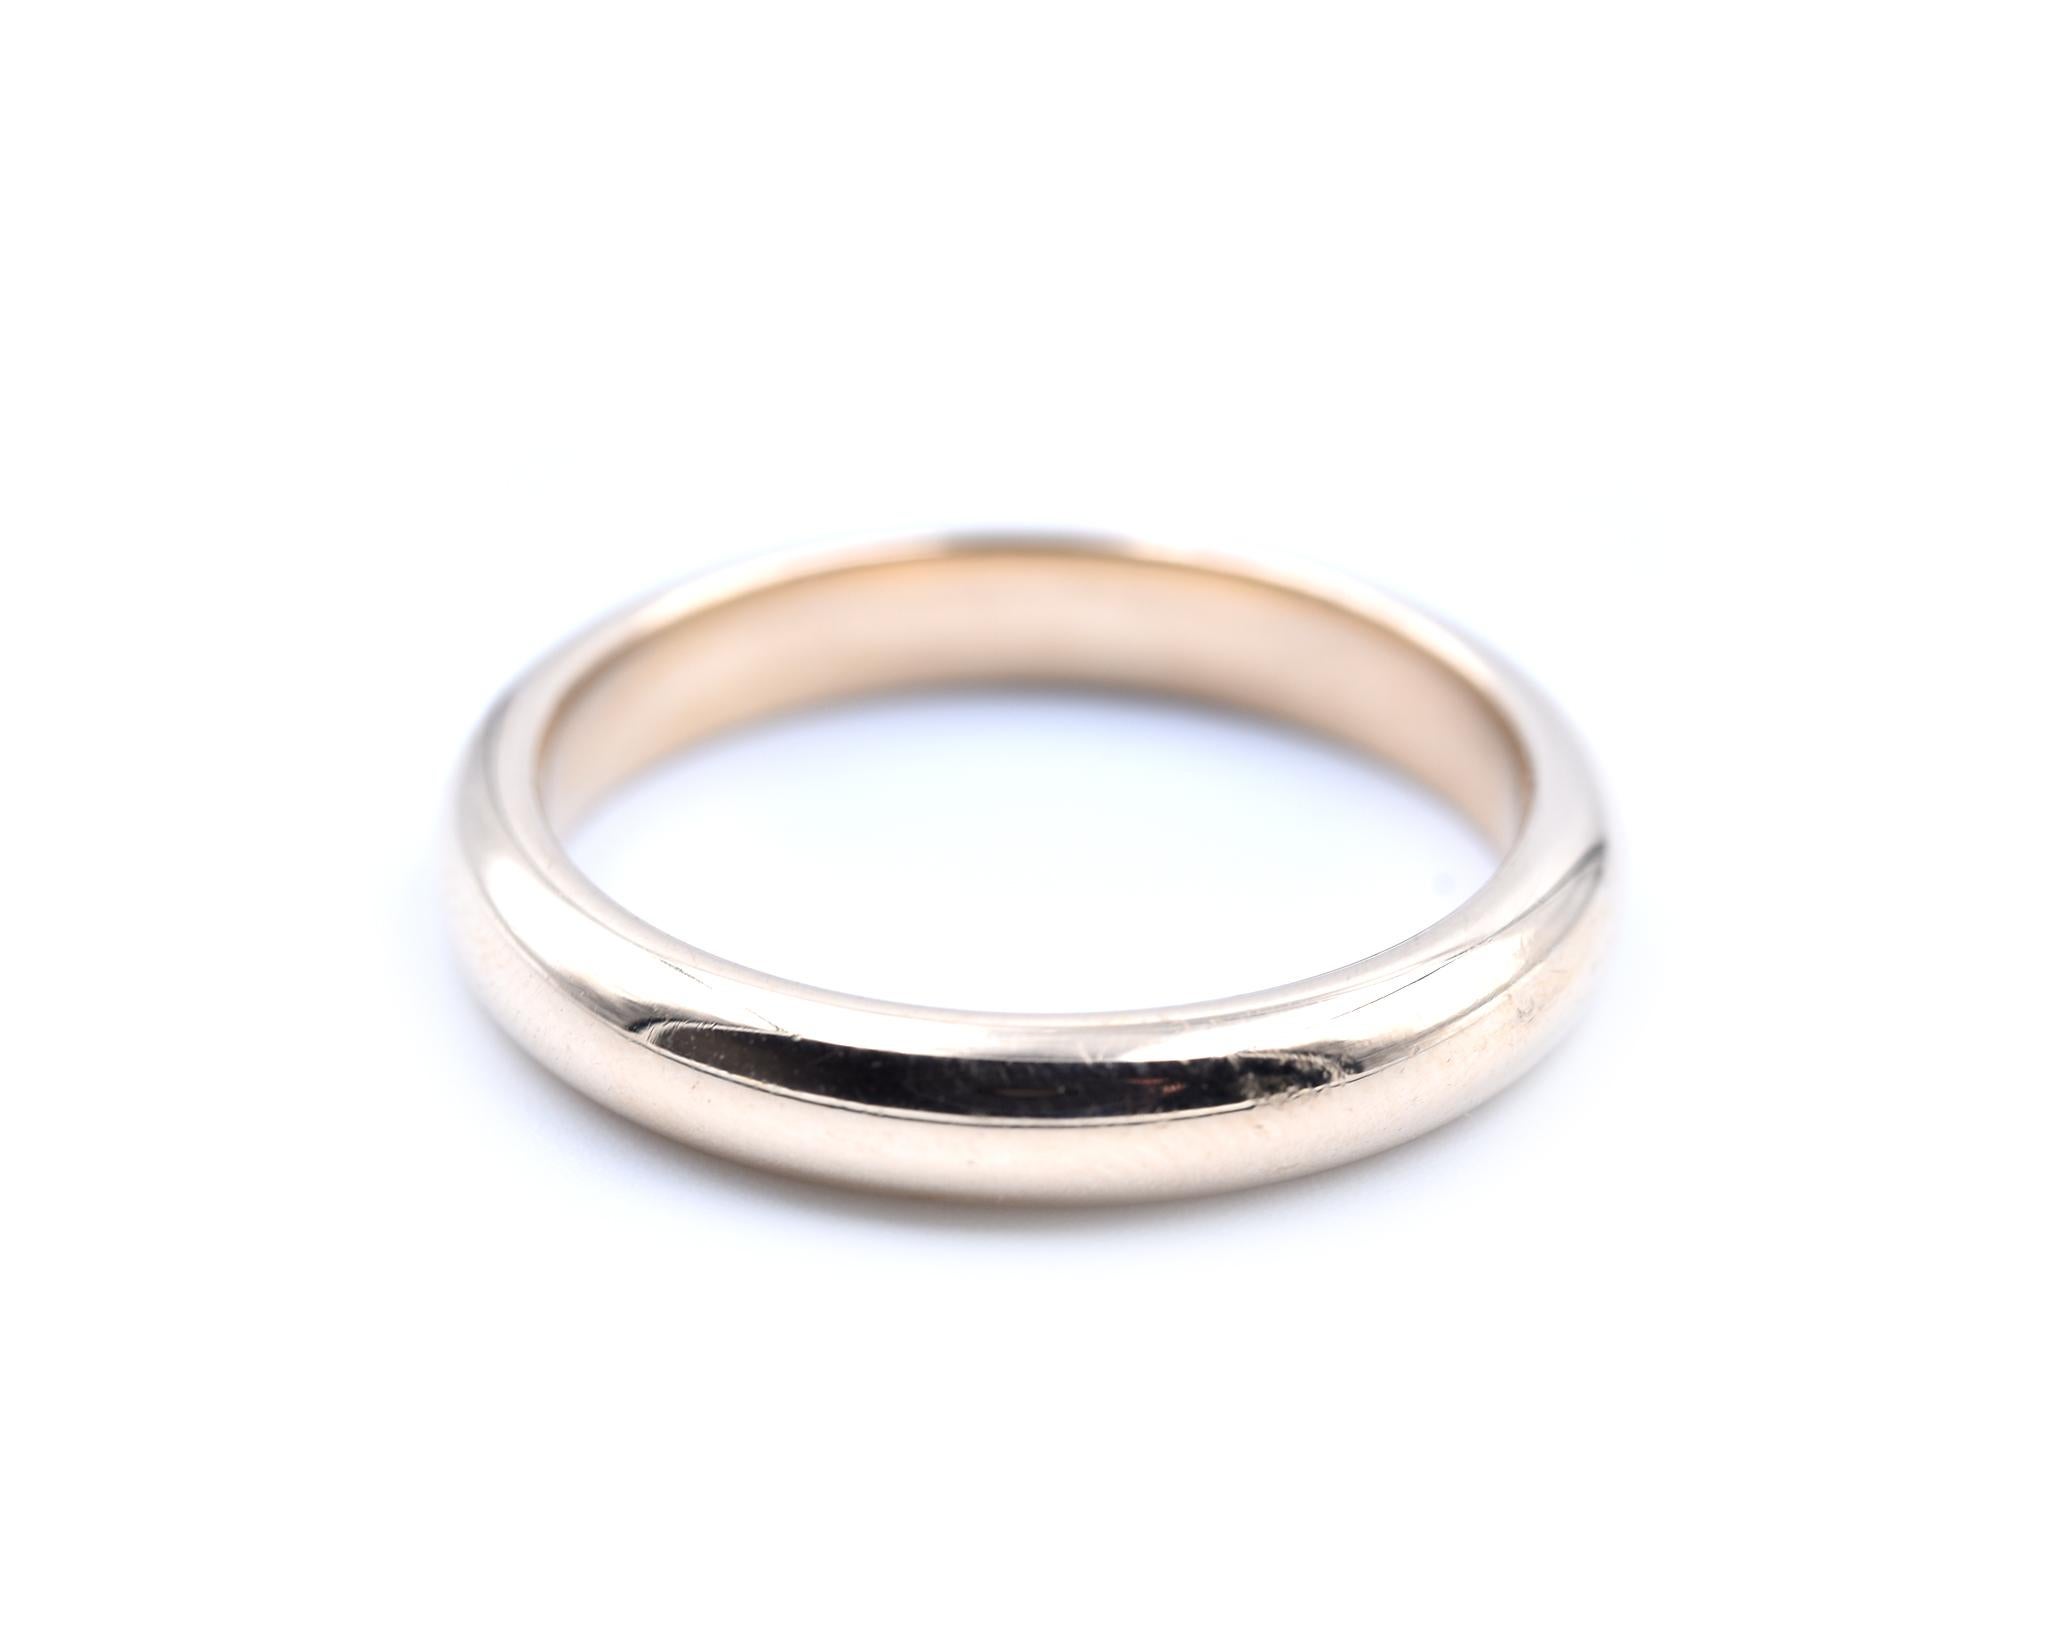 Designer: custom design
Material: 14k yellow gold
Dimensions: ring is 4mm wide
Ring Size: 11 1/4 (please allow two additional shipping days for engraving and sizing)
Weight: 7.72 grams
